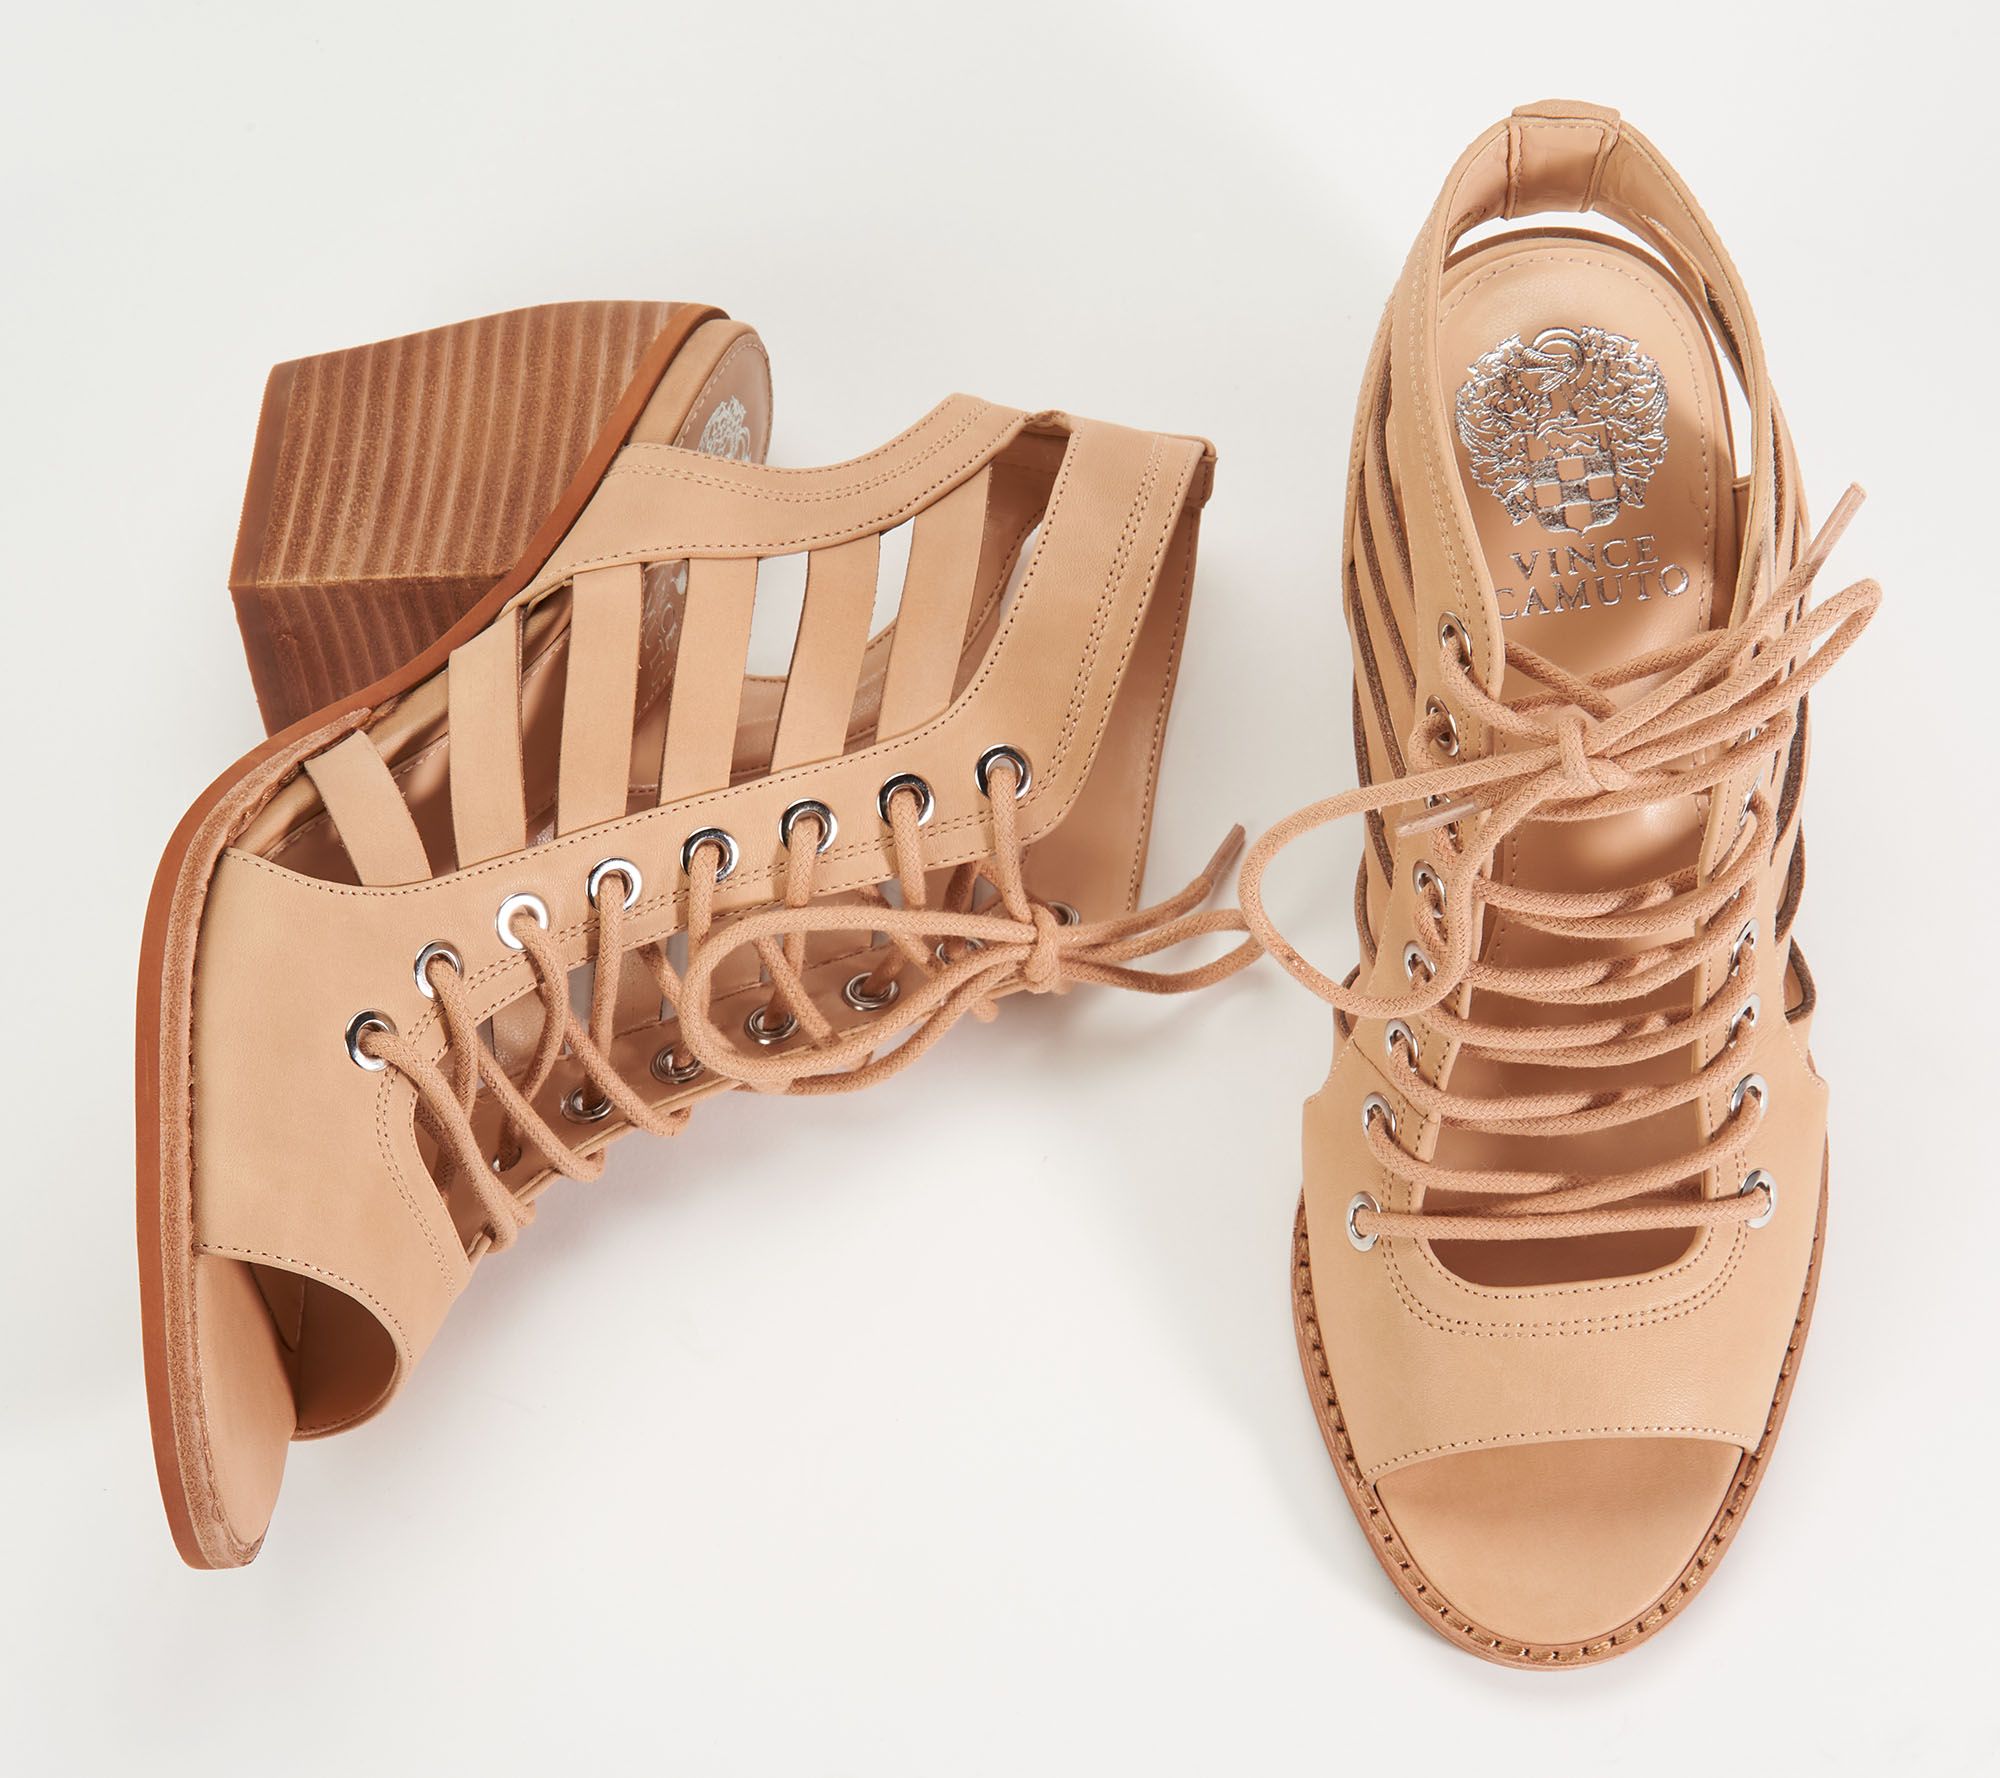 town shoes vince camuto